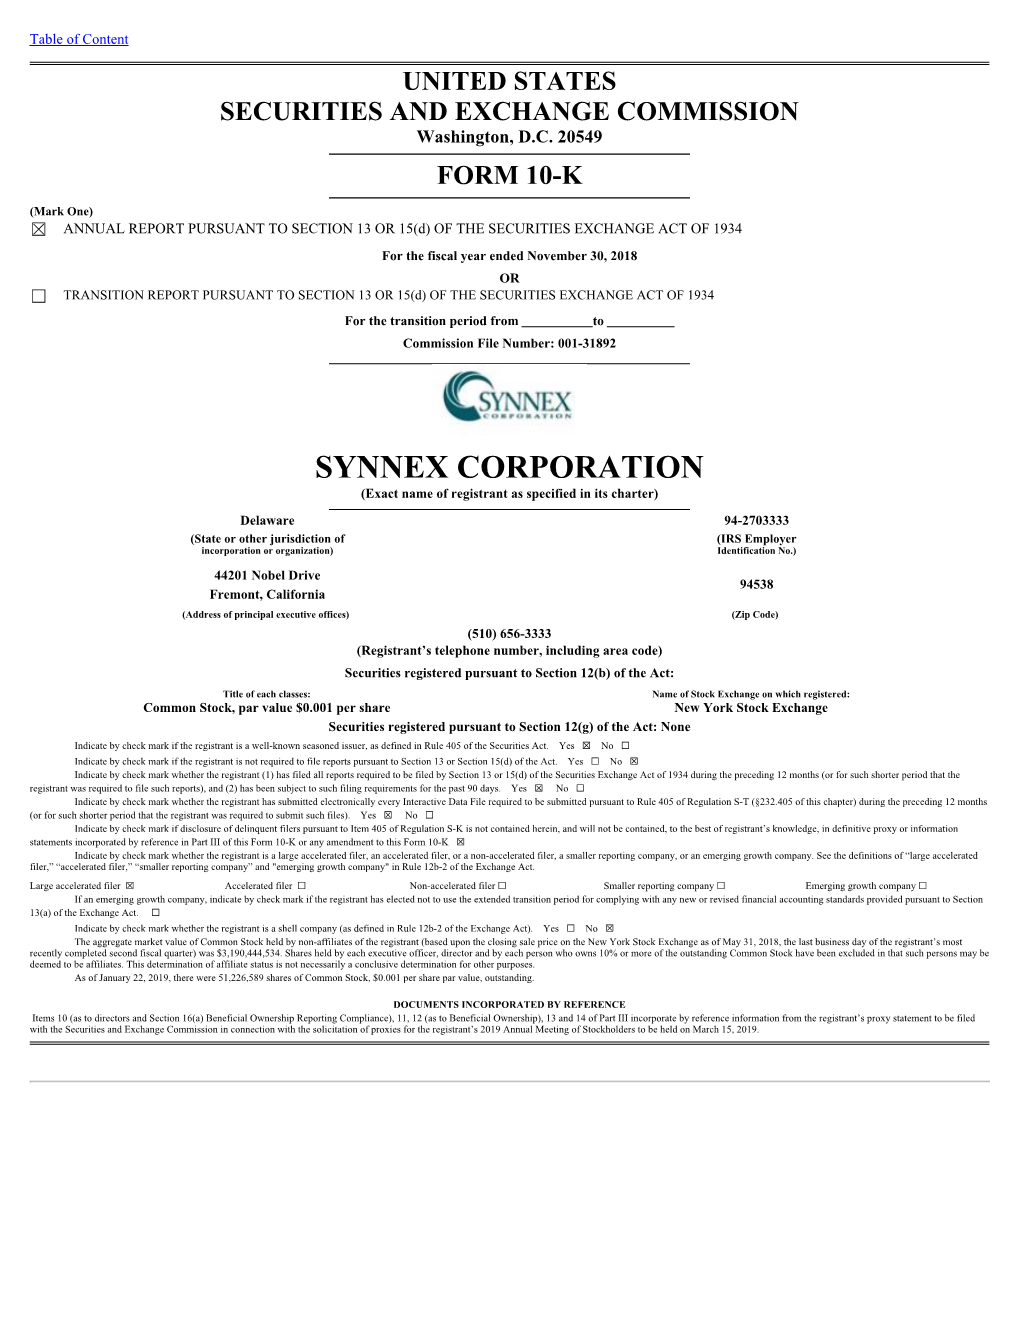 SYNNEX CORPORATION (Exact Name of Registrant As Specified in Its Charter)